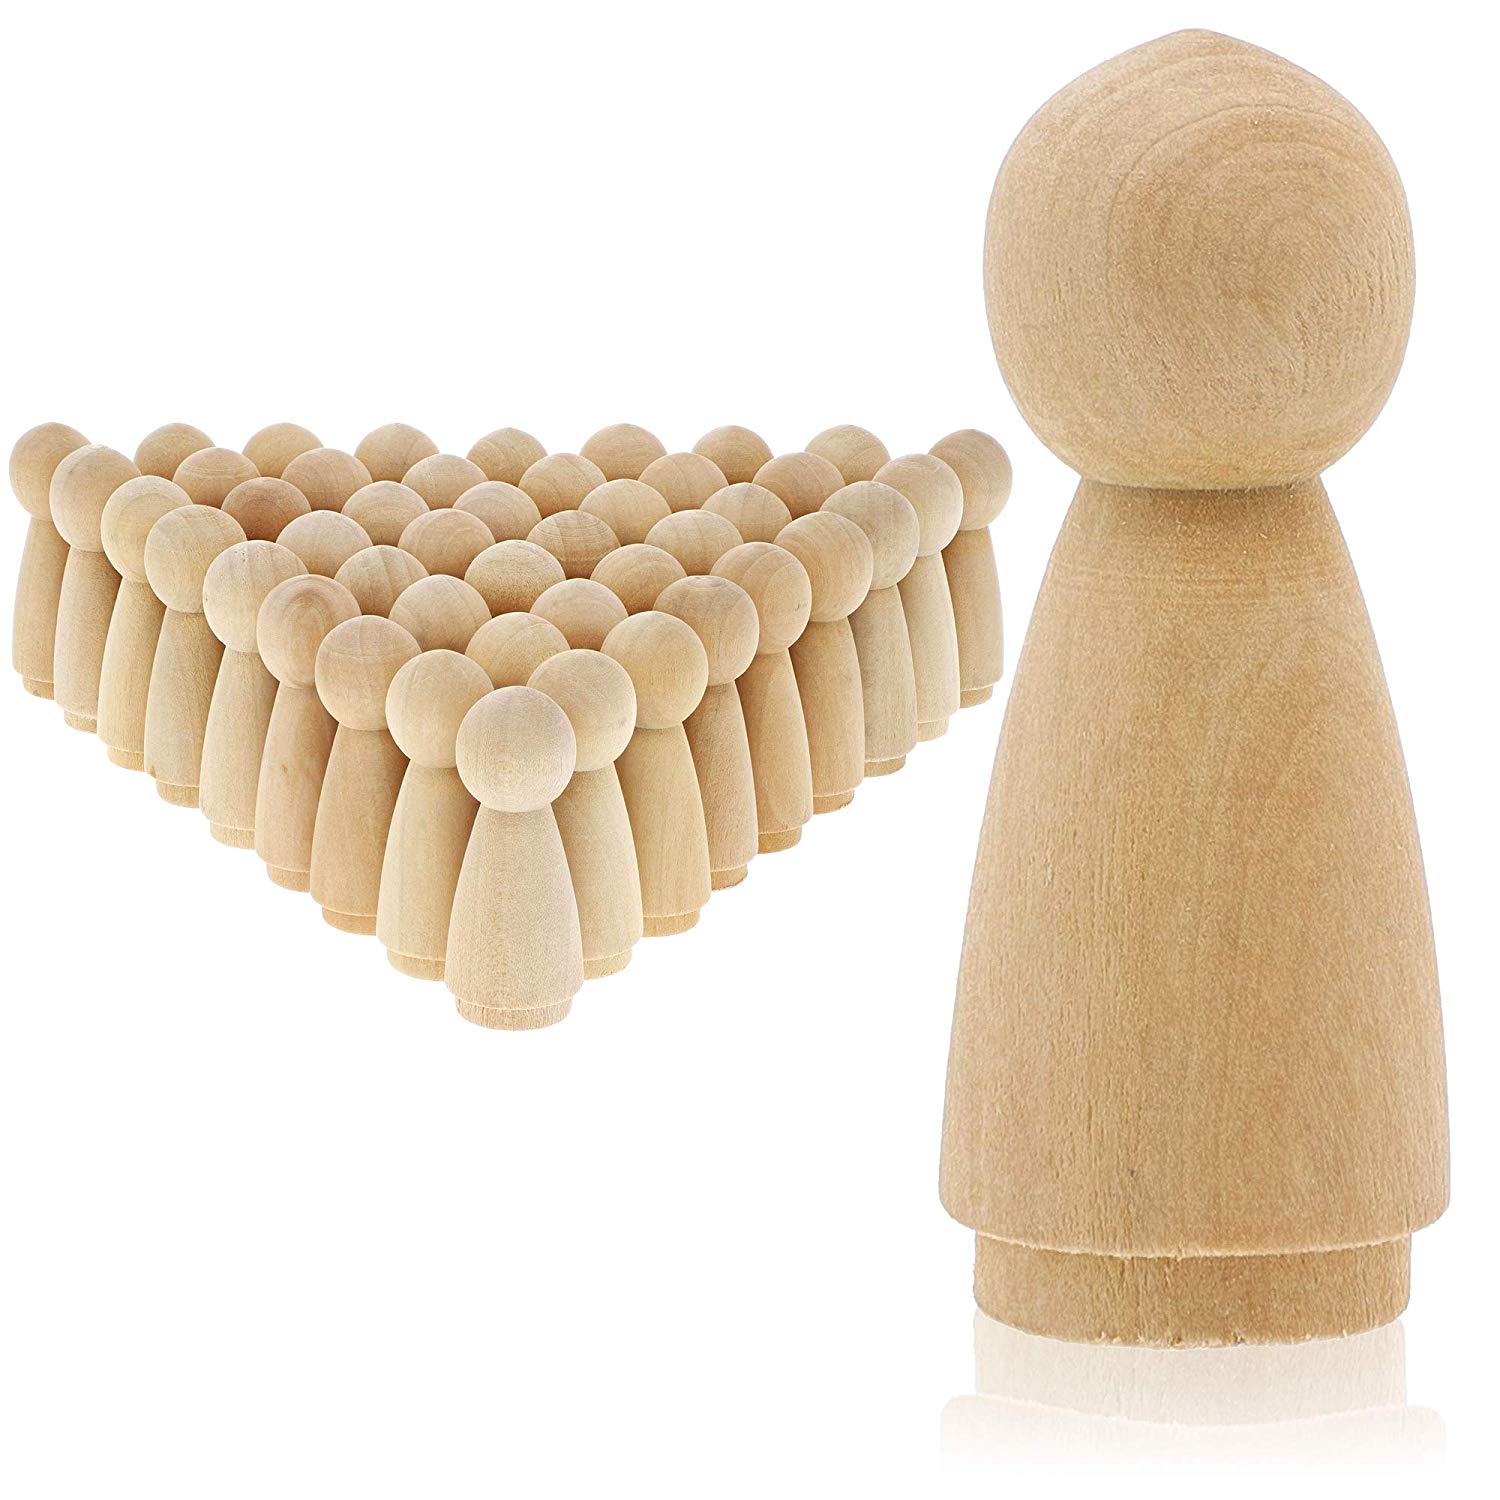 50 Pack Unfinished Wooden Peg Dolls, Peg People, Doll Bodies